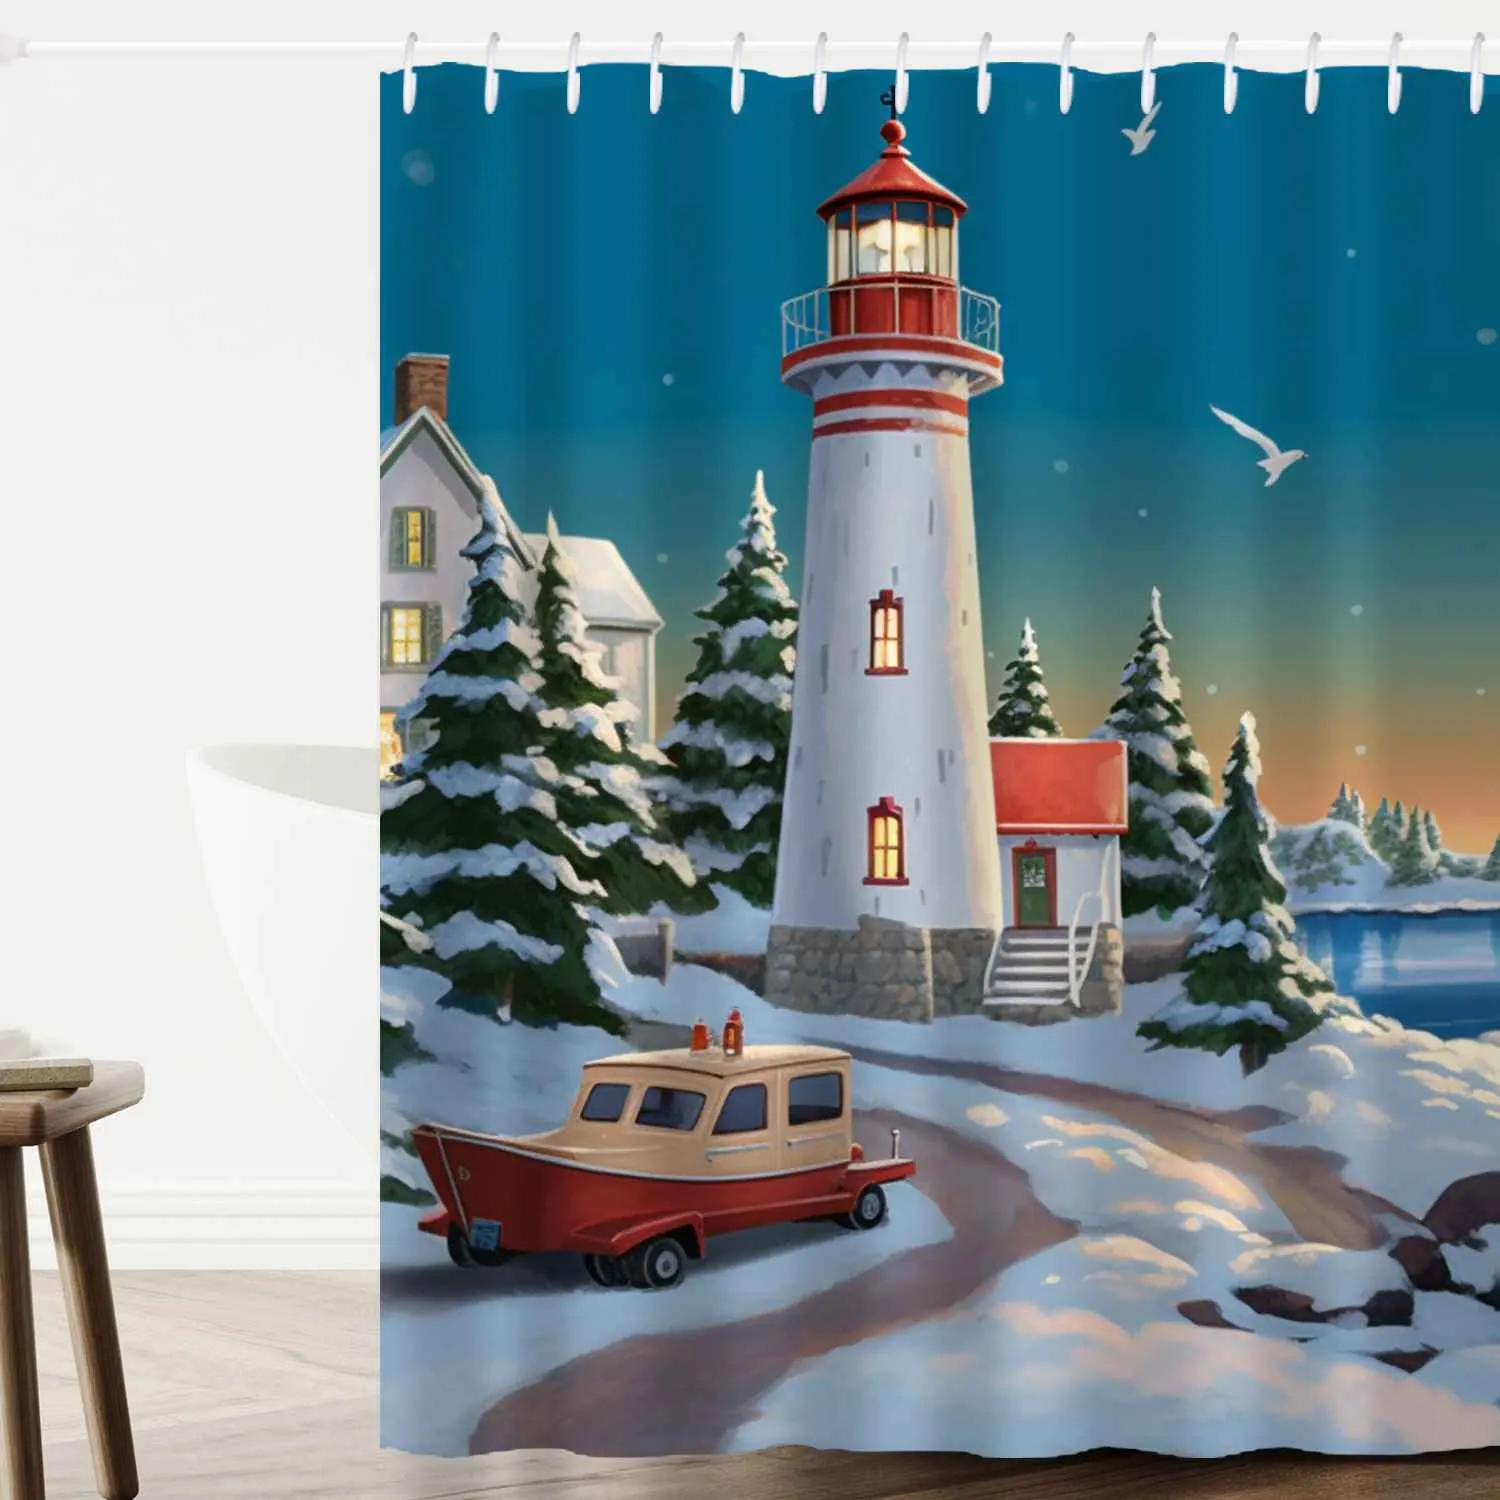 Guest bathroom shower curtain ideas: A shower curtain with a lighthouse in the snow.